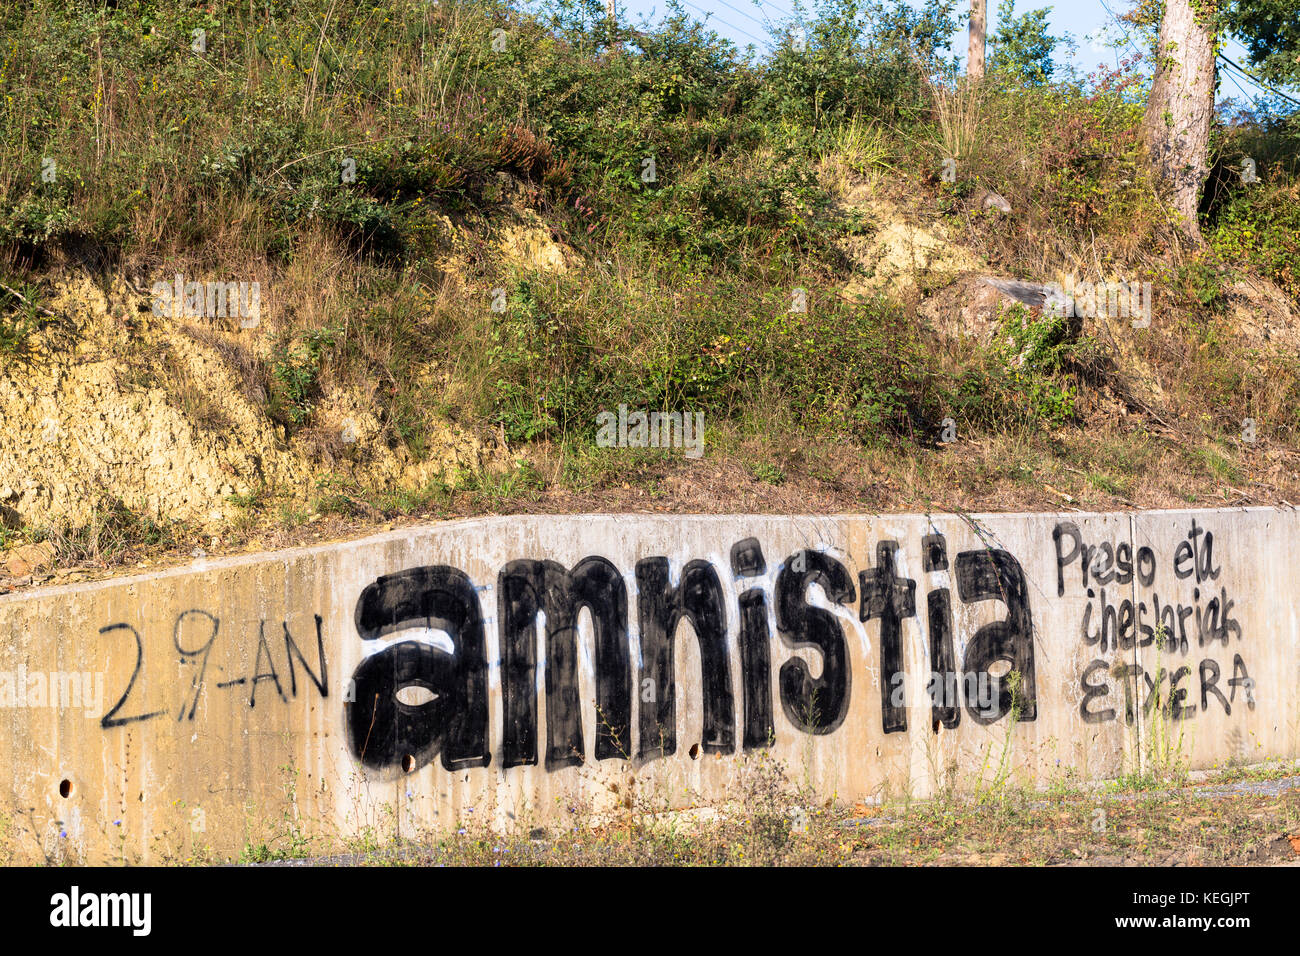 Amnistia banner at Zubialde promoting Amnesty, after 29 years of protests, in Biskaia Basque region, Spain Stock Photo